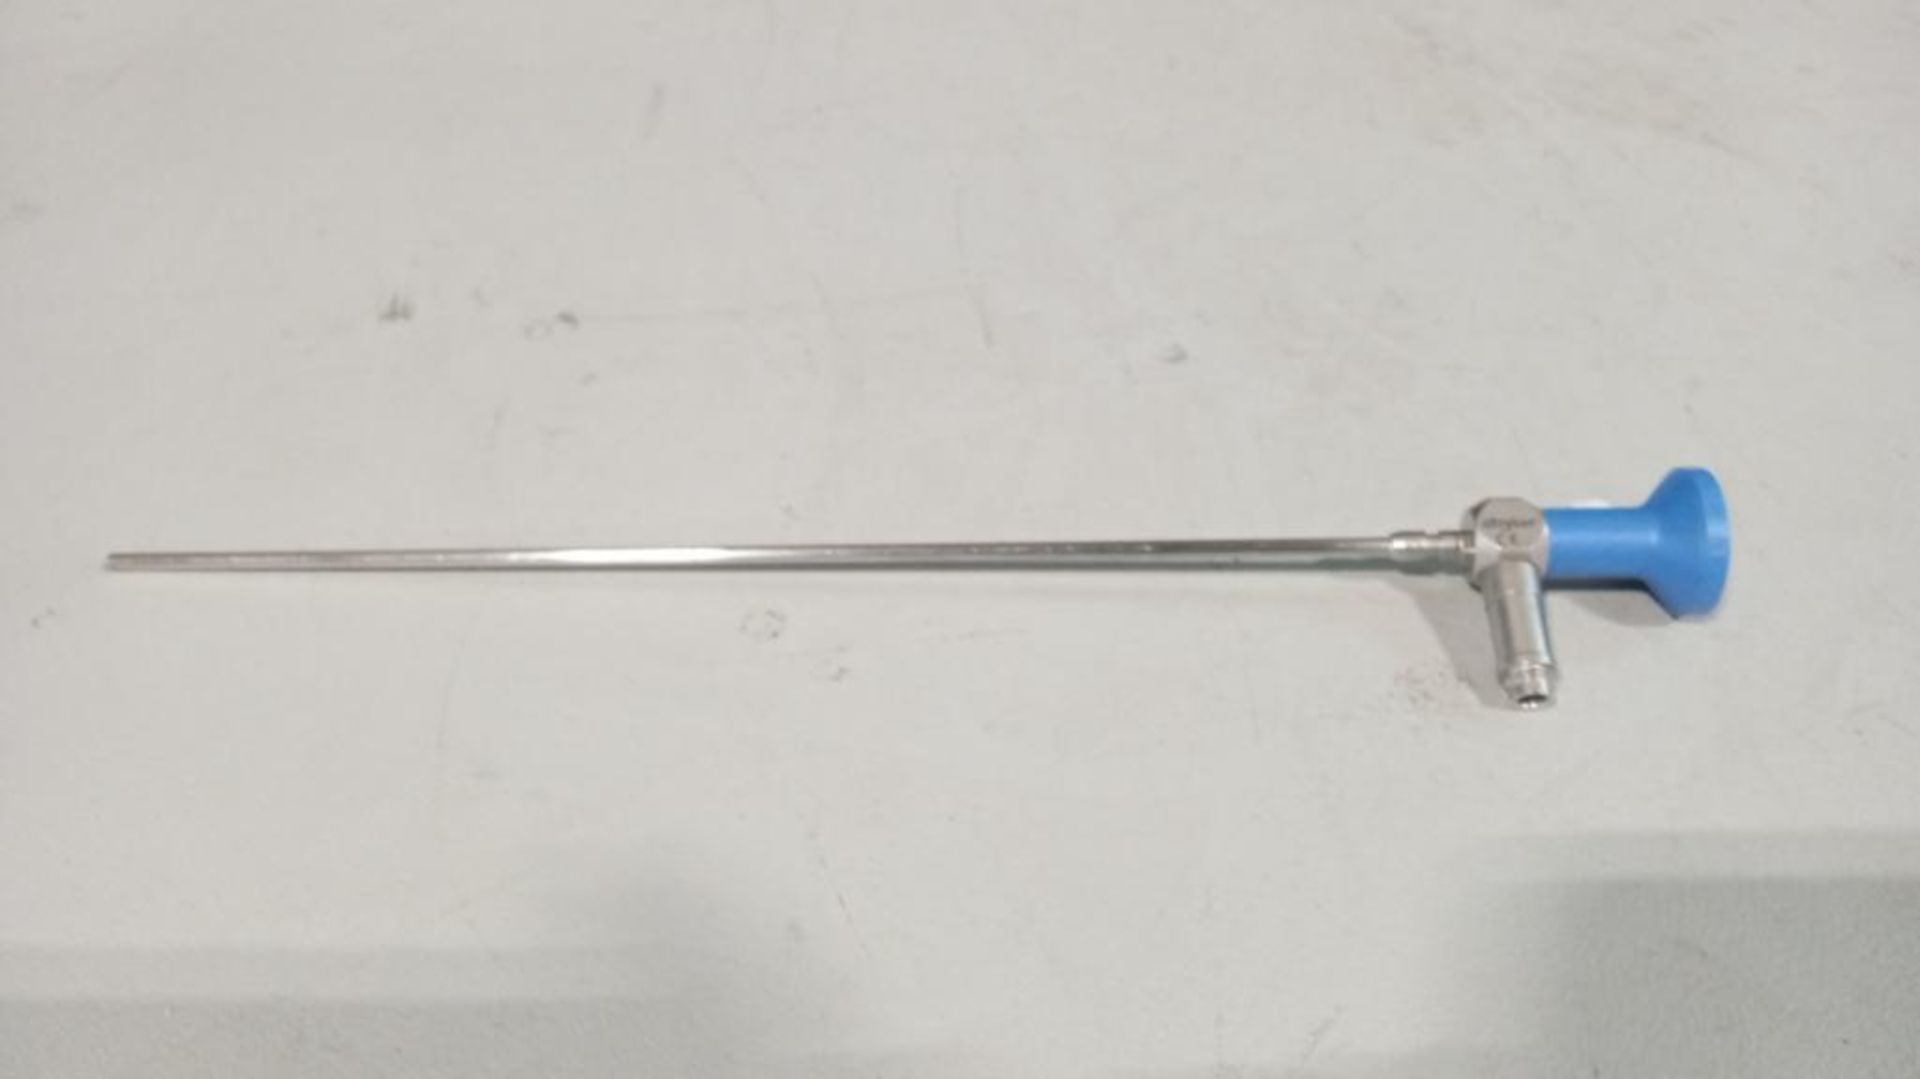 STRYKER 502-777-012 4MM 12 DEGREE AUTOCLAVABLE CYSTOSCOPE - Image 3 of 3